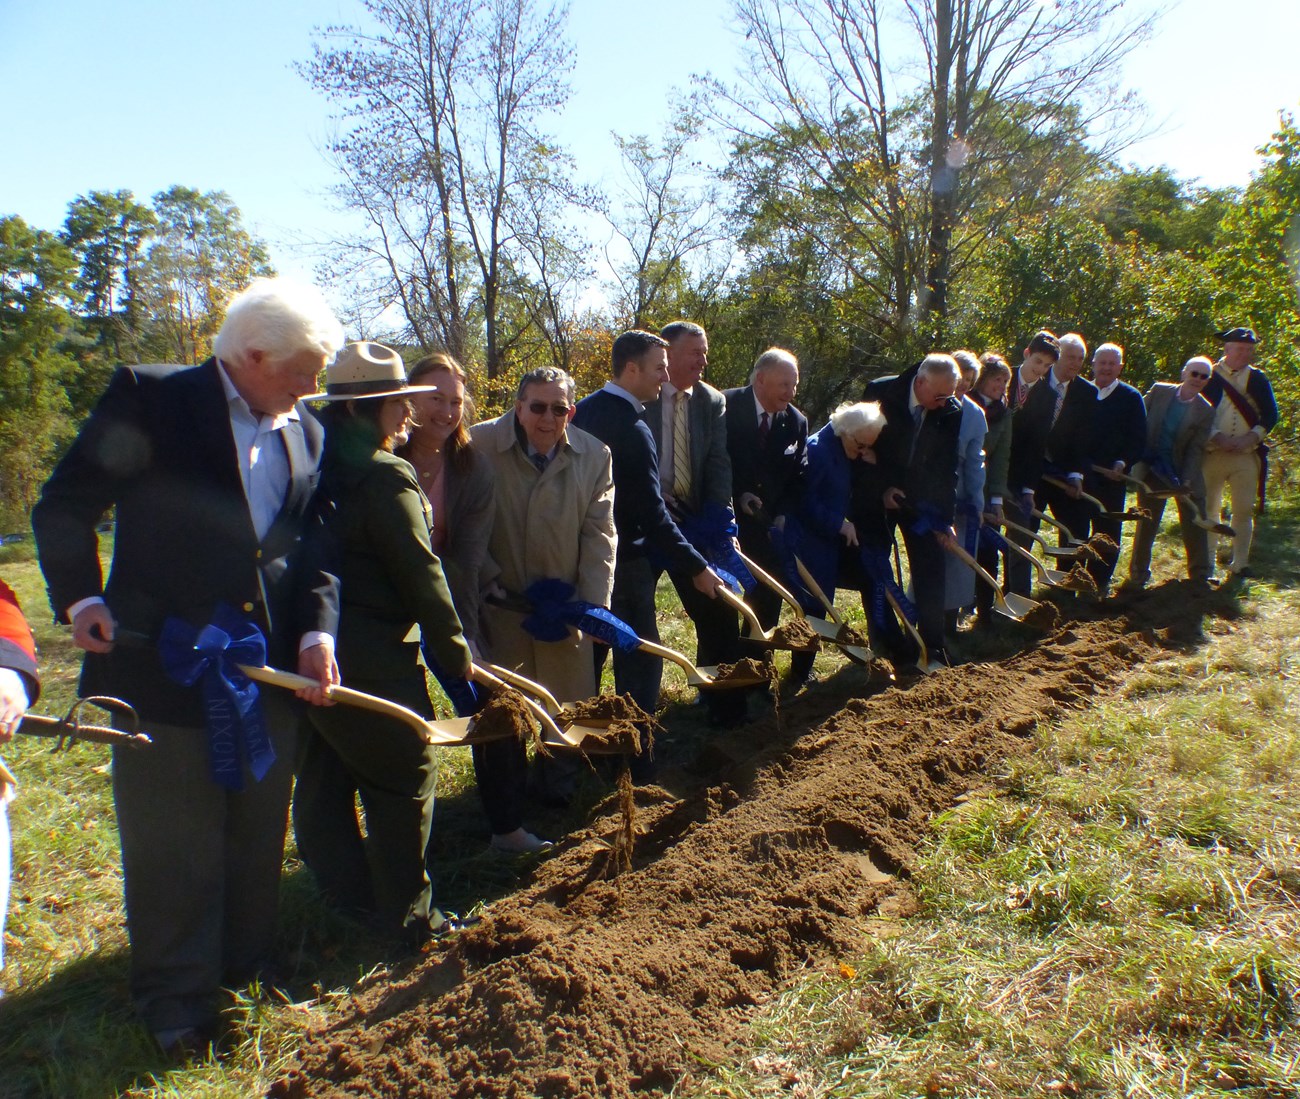 Fifteen people plant shovels in the dirt to break ground for a new monument.